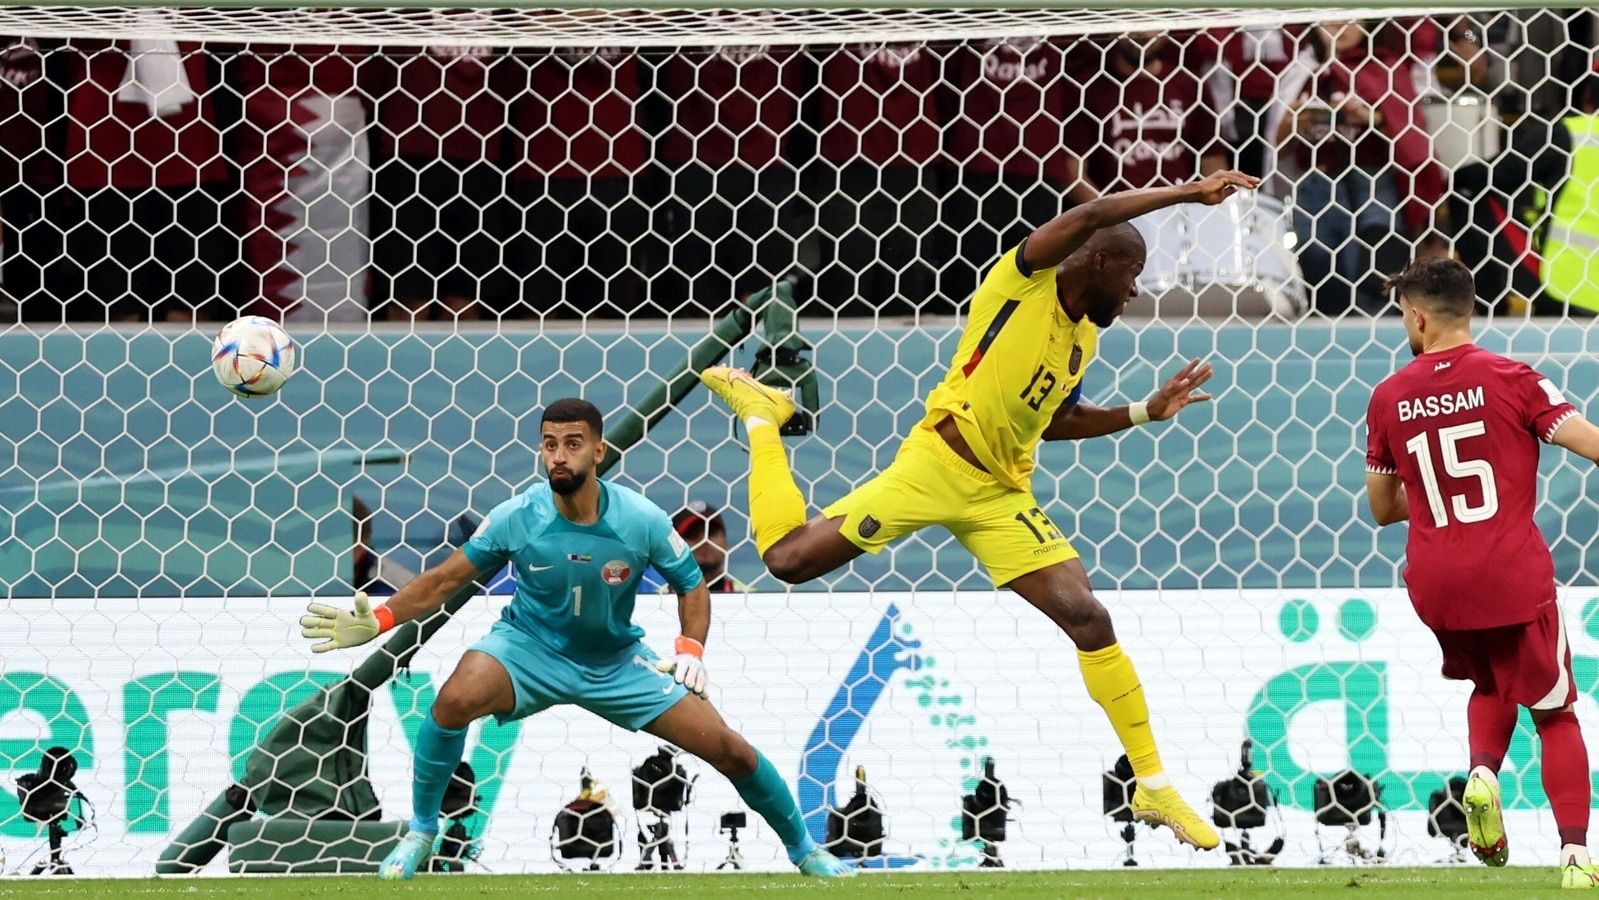 Qatar vs Ecuador, FIFA World Cup 2022 Highlights Valencias brace helps ECU spoil party for QAT with 2-0 win in opener Hindustan Times